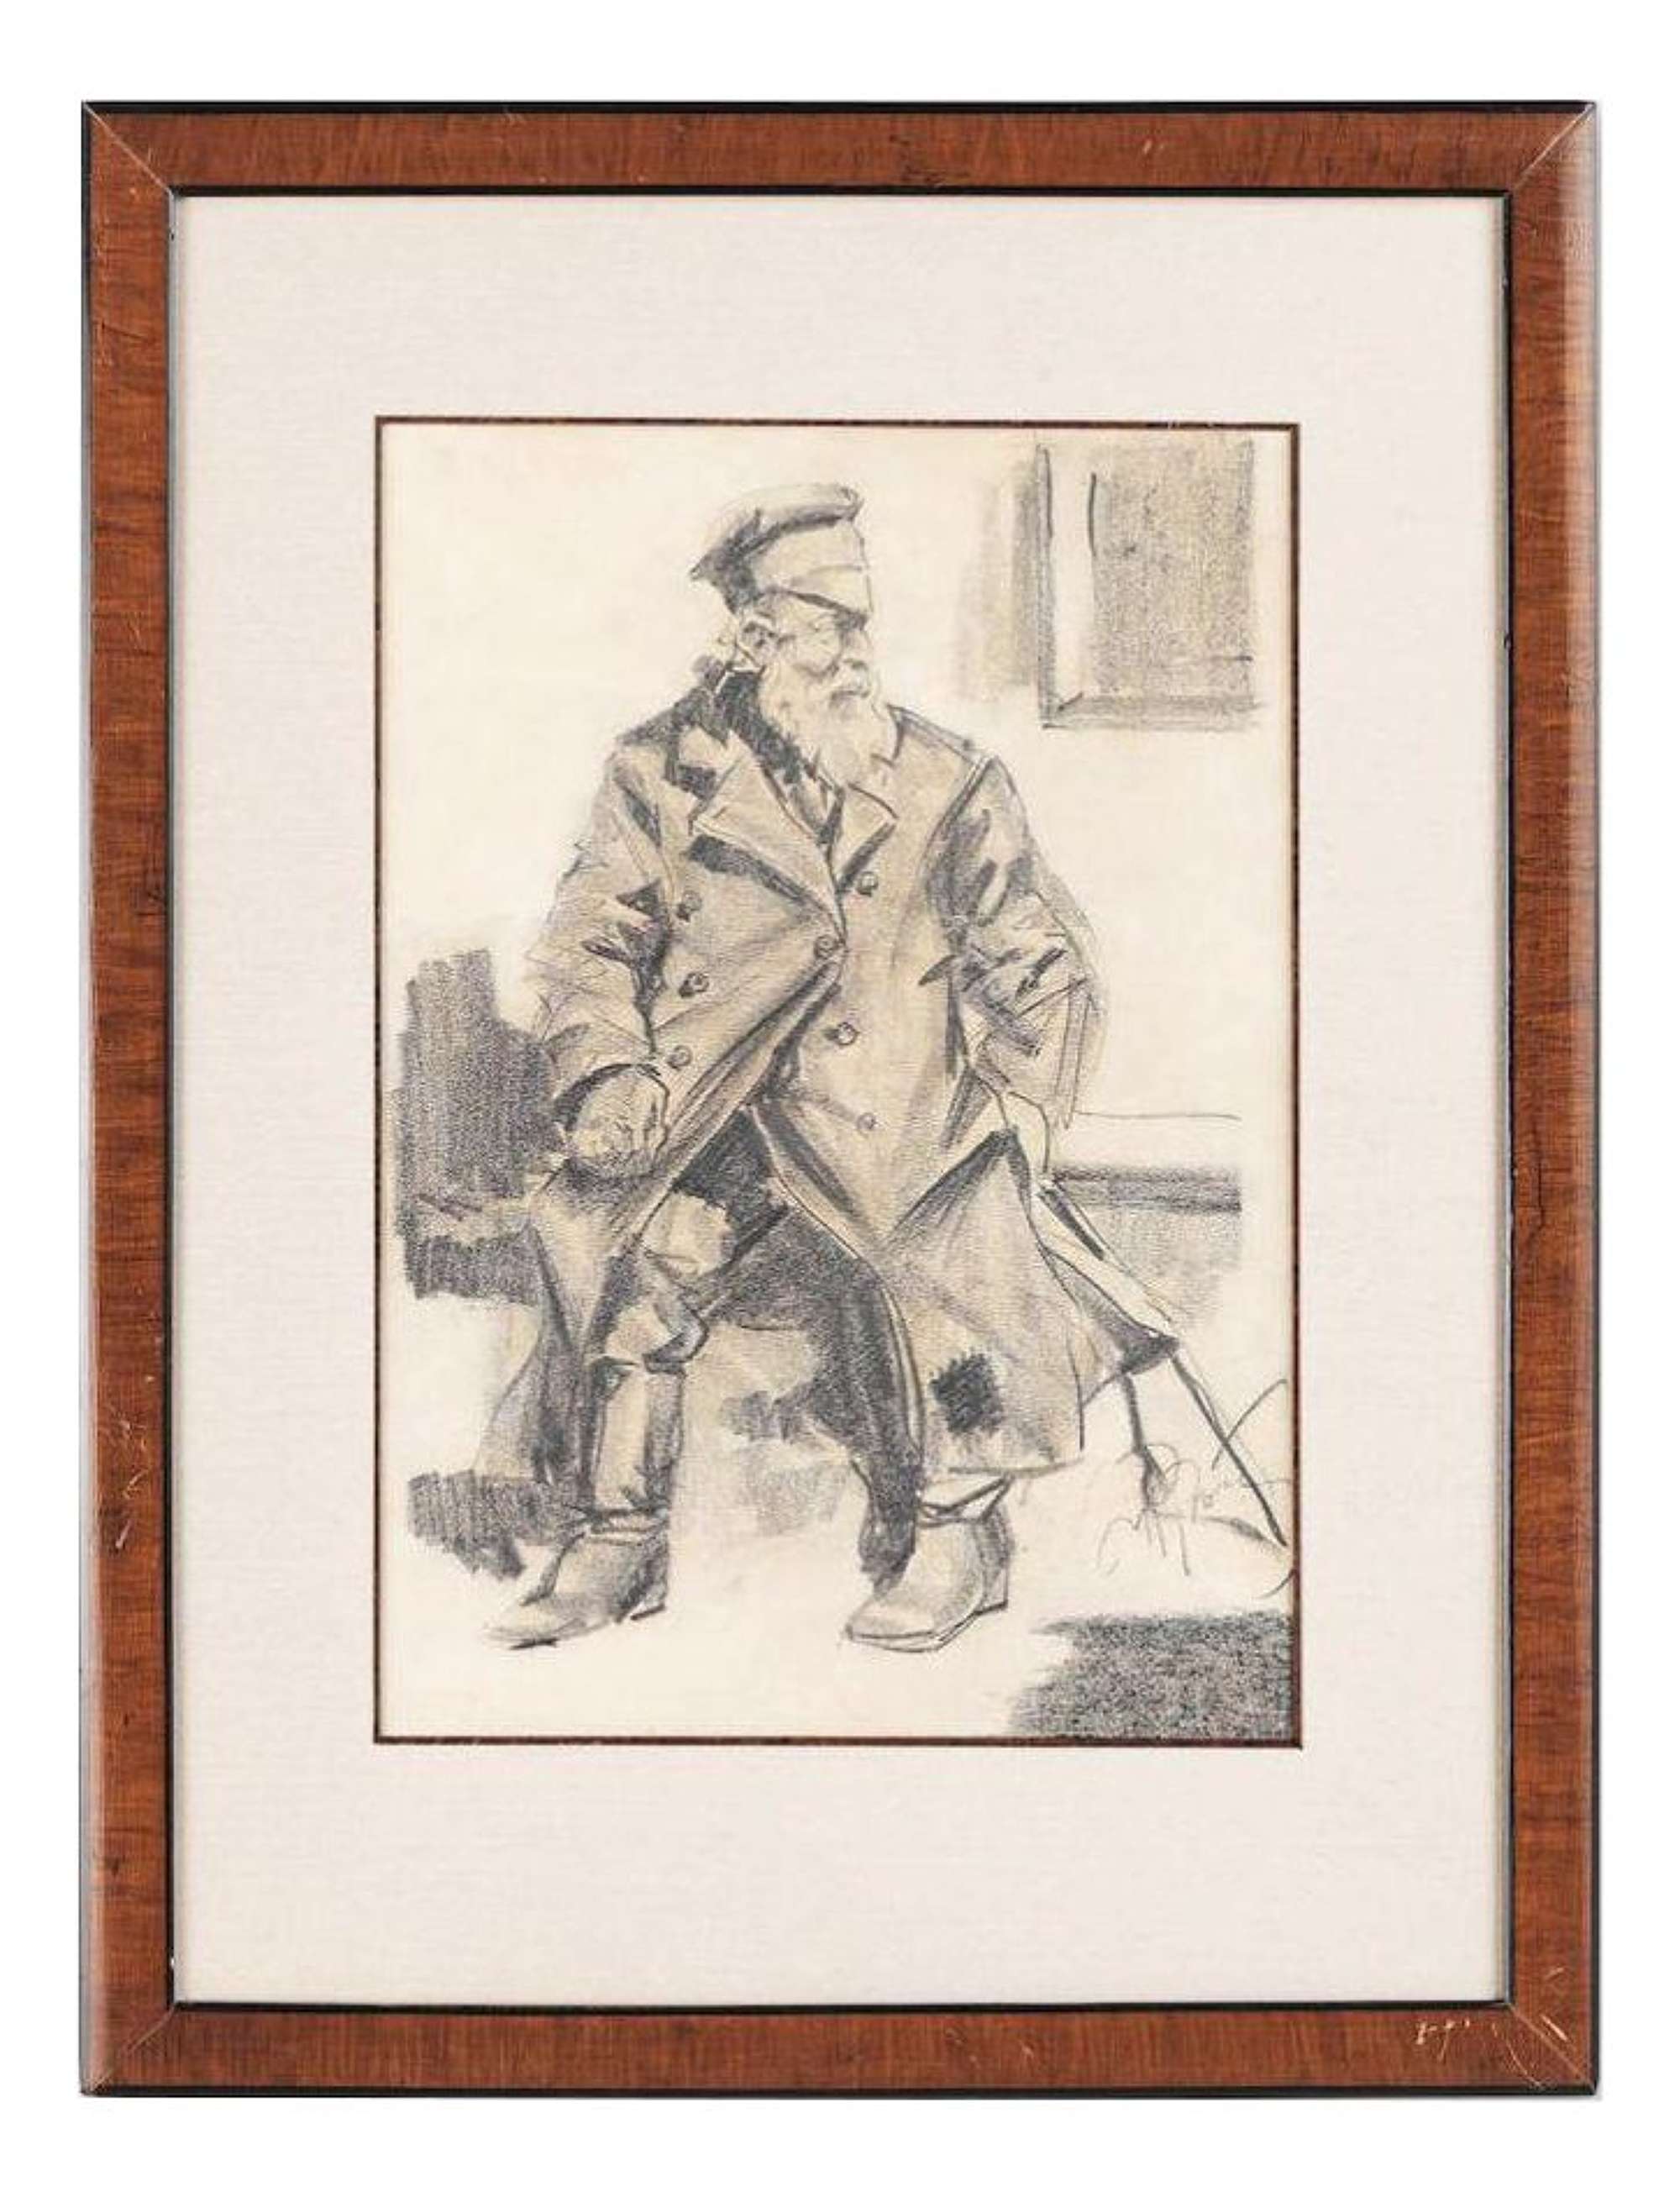 I. Repin, Old Man on the Bench, Pencil on Paper, Framed